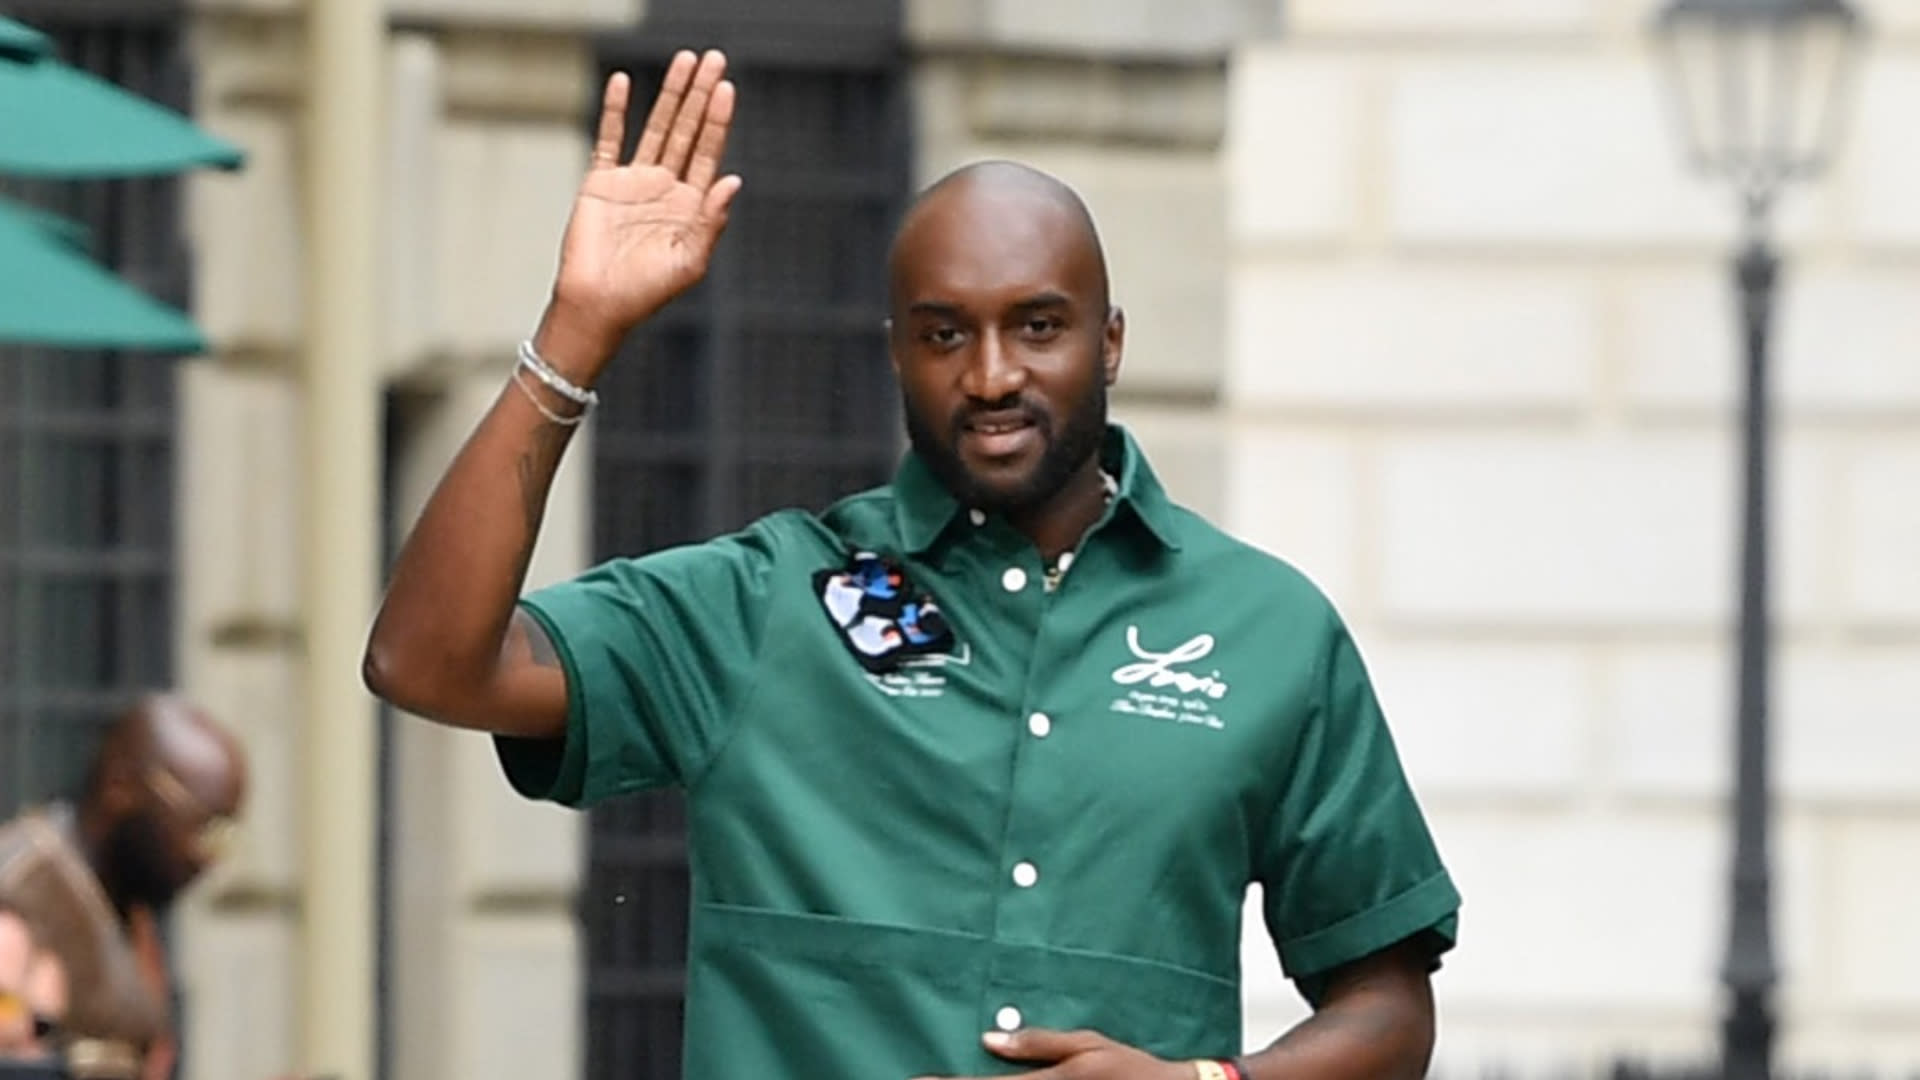 Virgil Abloh's life, work continue to inspire Rockford creatives